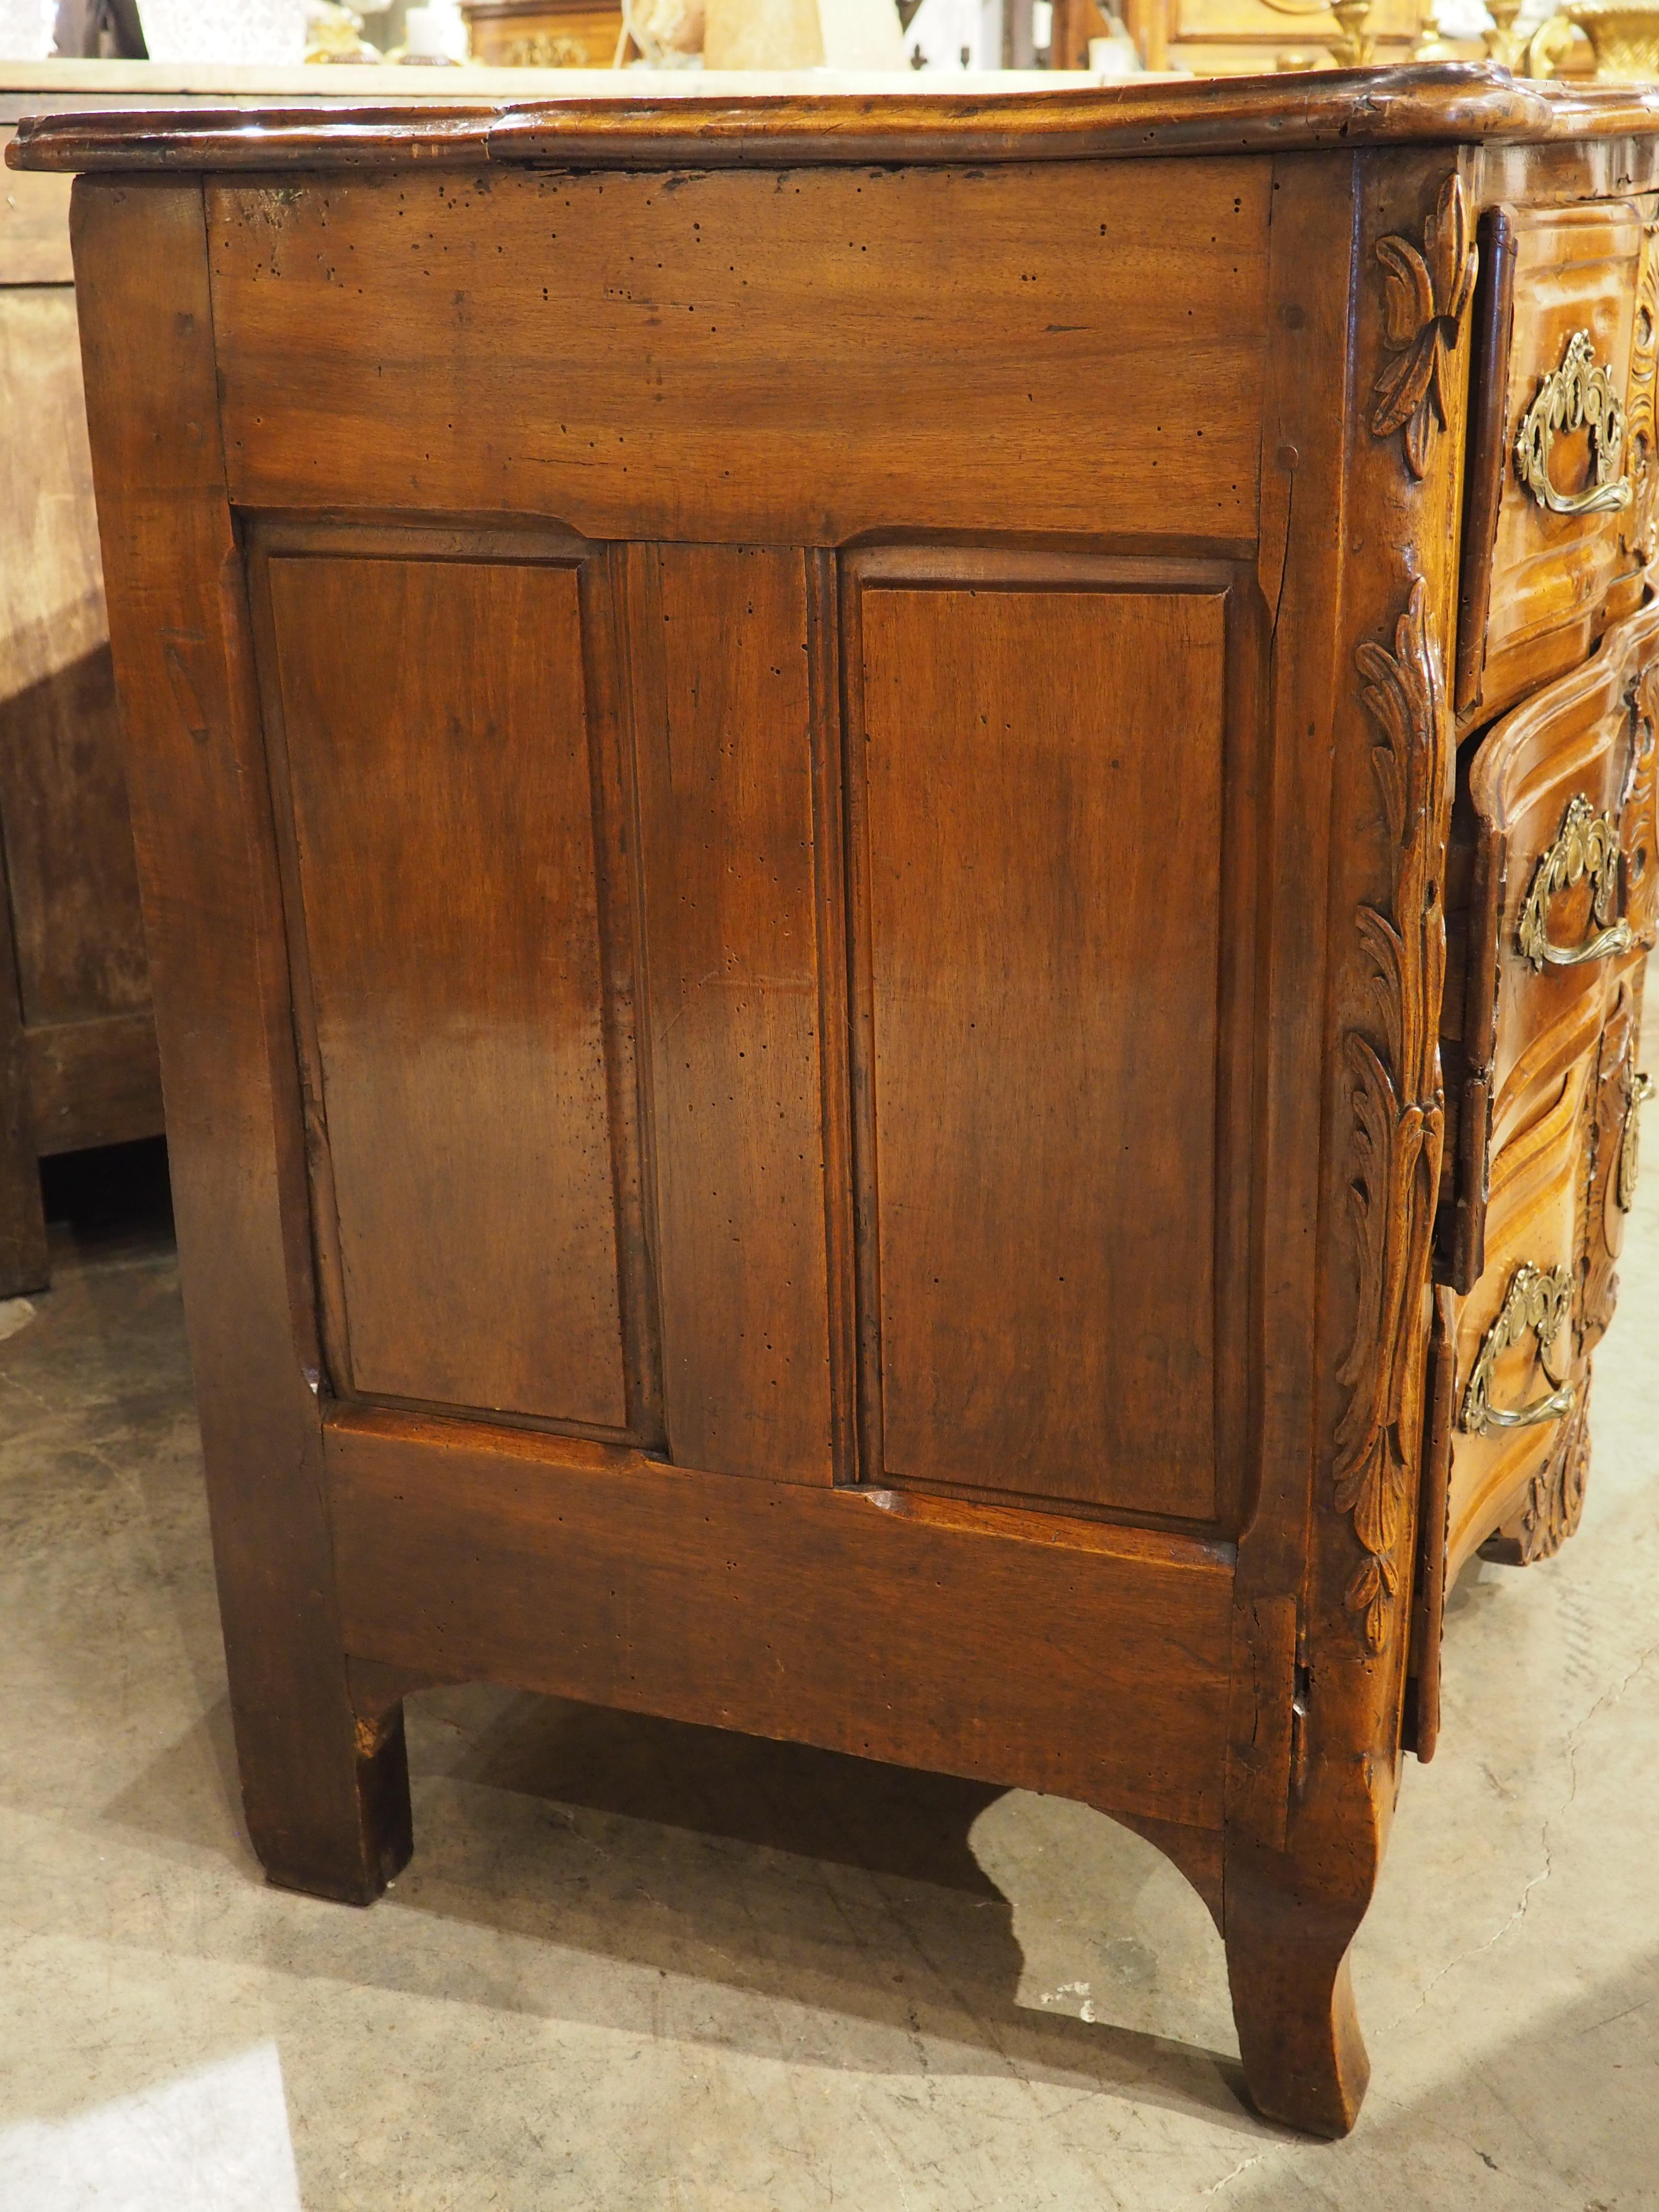 Hand-Carved 18th Century Regence Period Carved Walnut Lyonnaise Commode 'Arbalete' For Sale